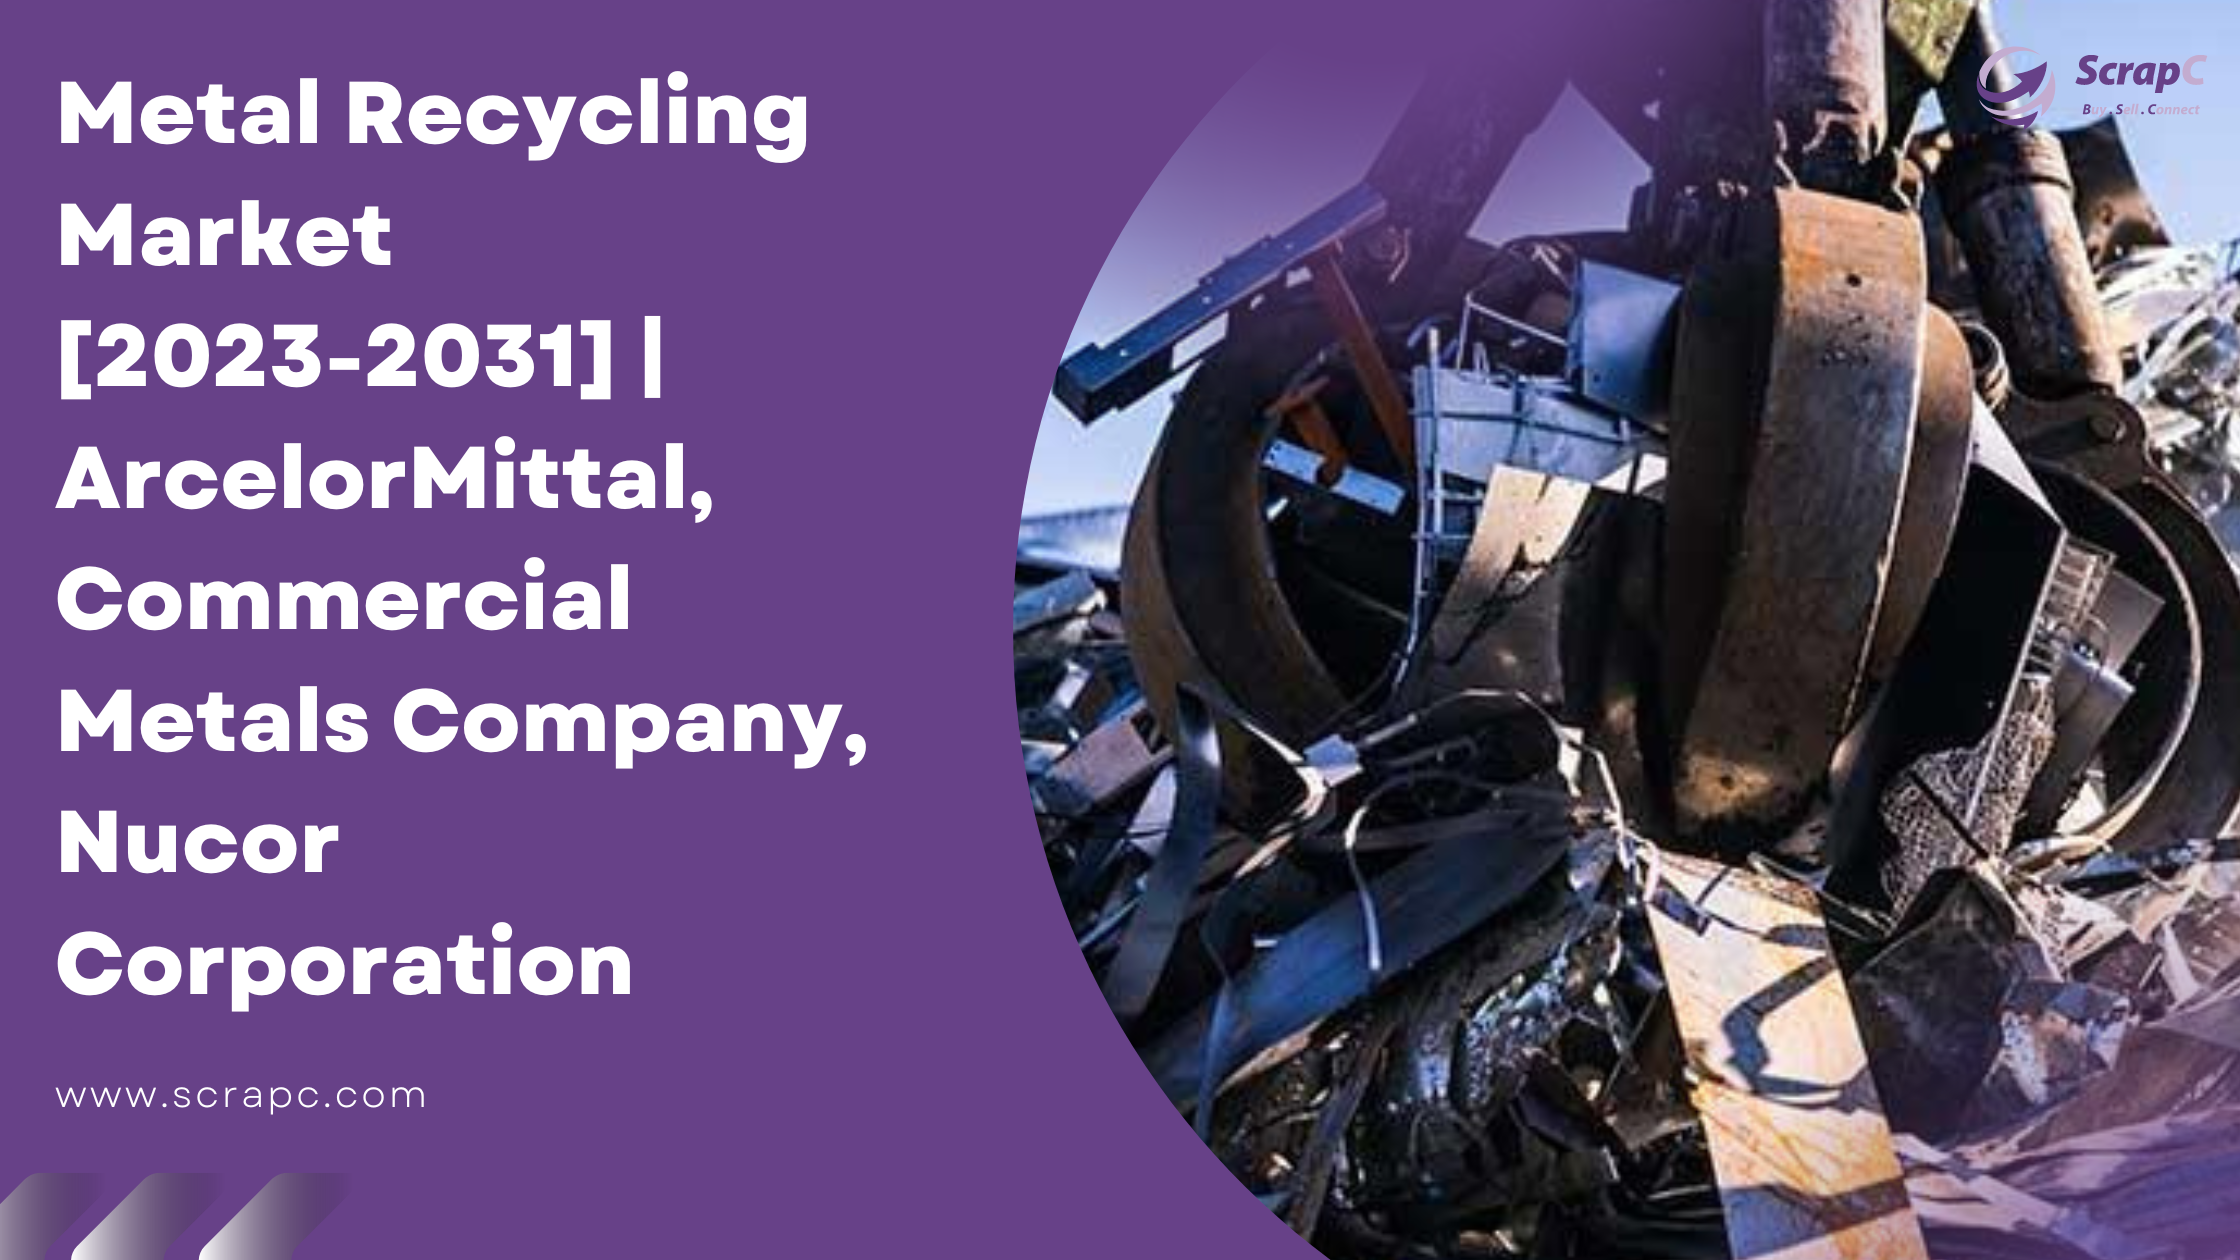 Metal Recycling Market 2023-2031 Report Cover